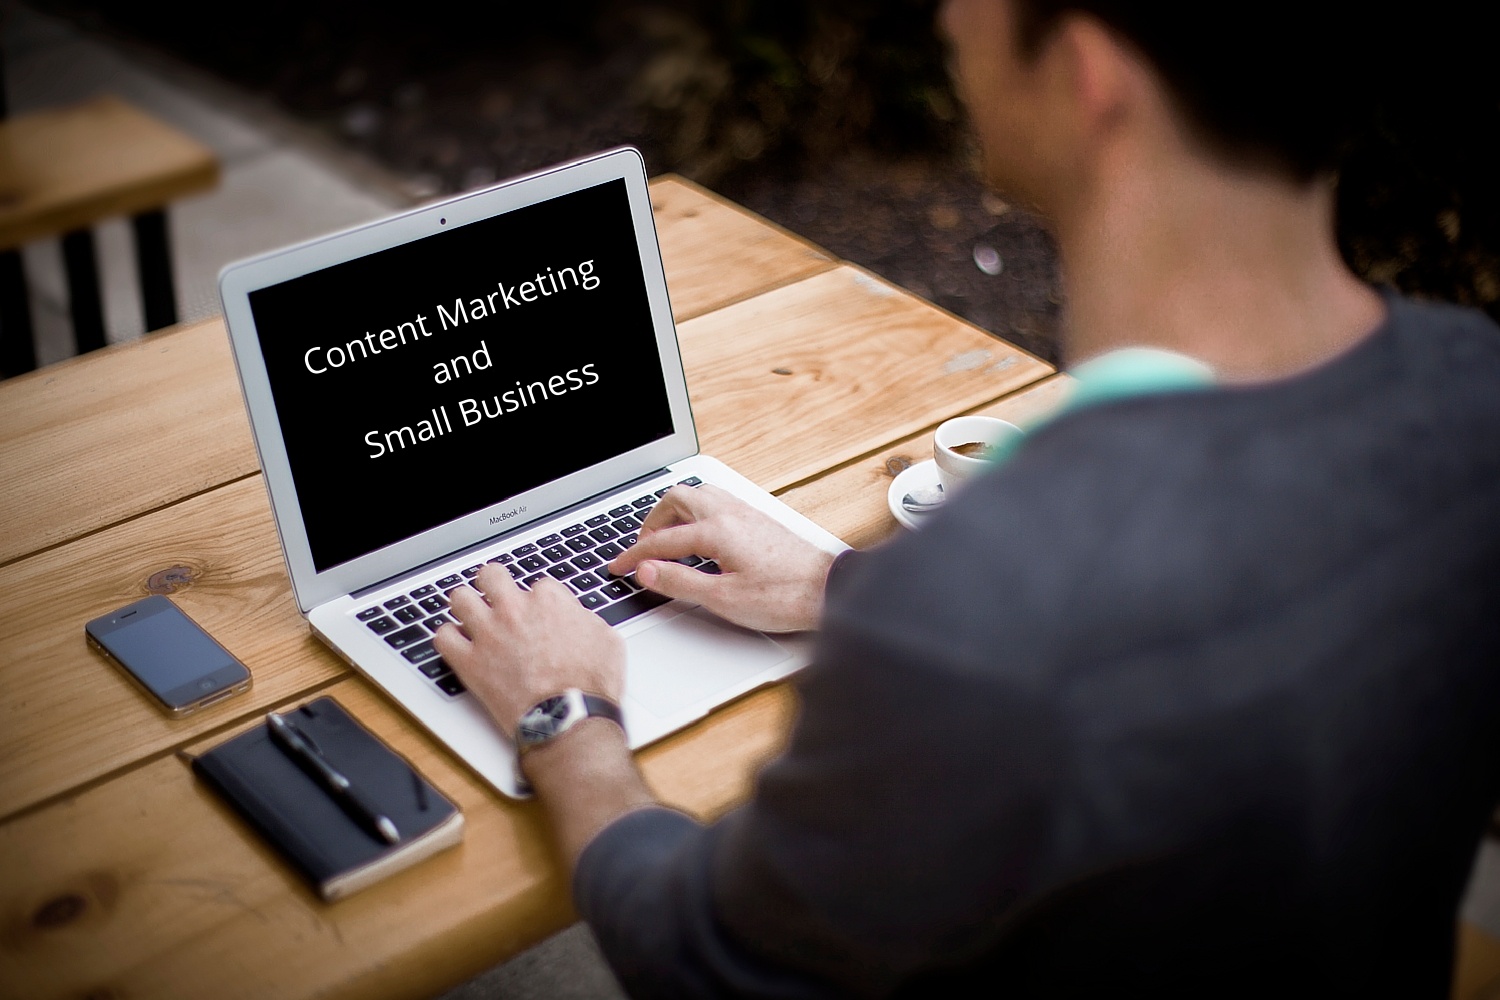 Why content marketing is important to small business